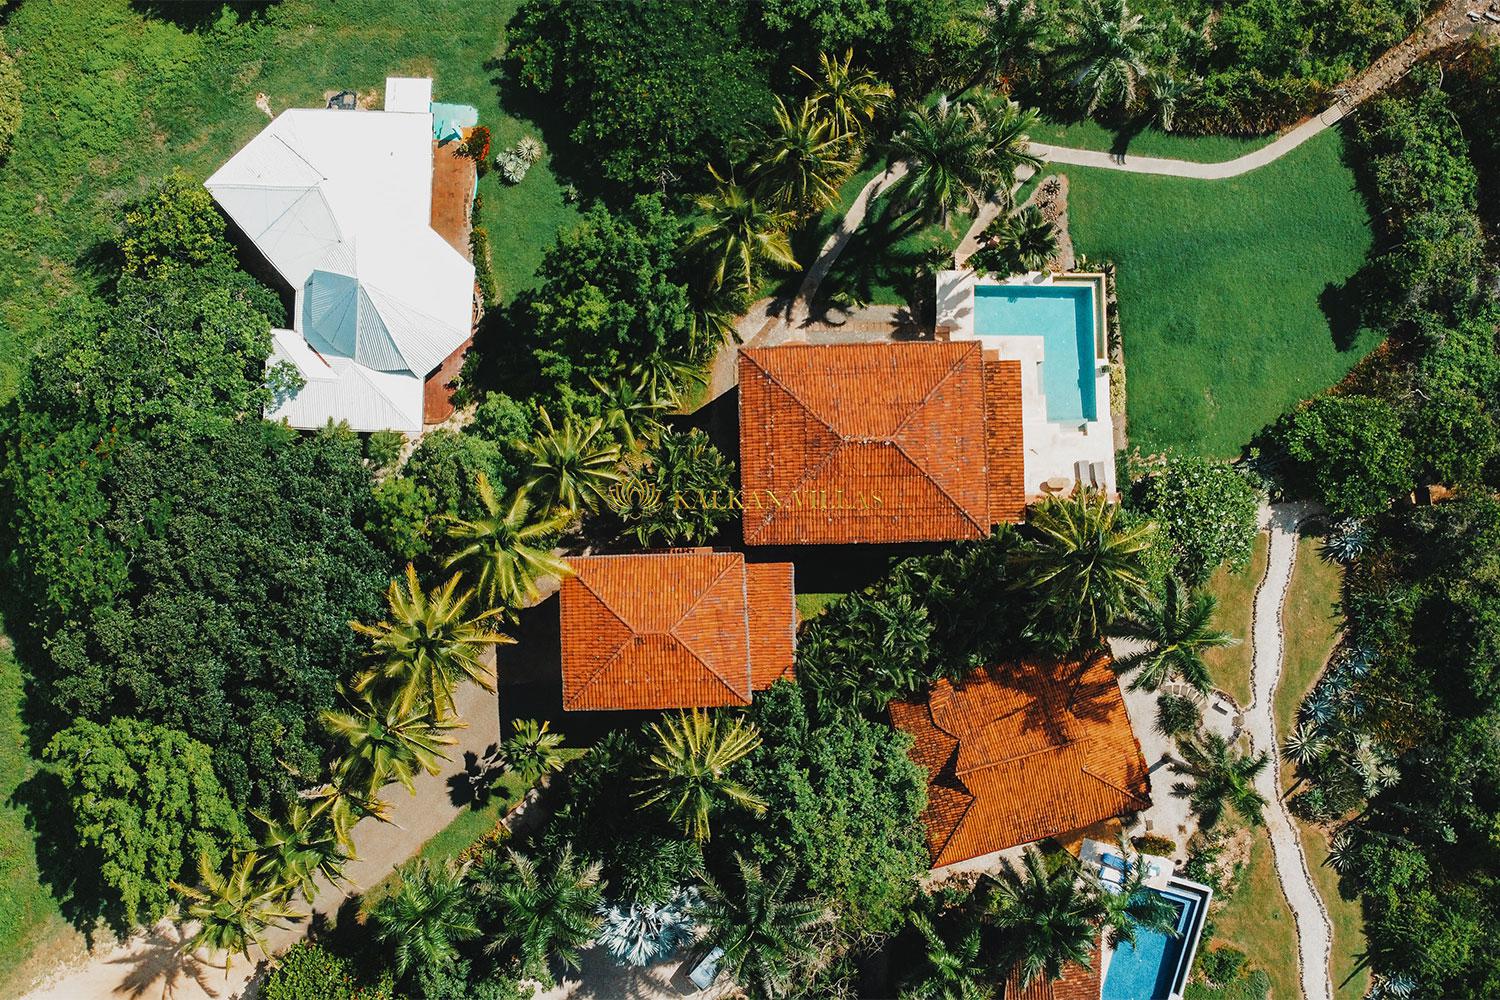 Things to Consider While Renting a Villa